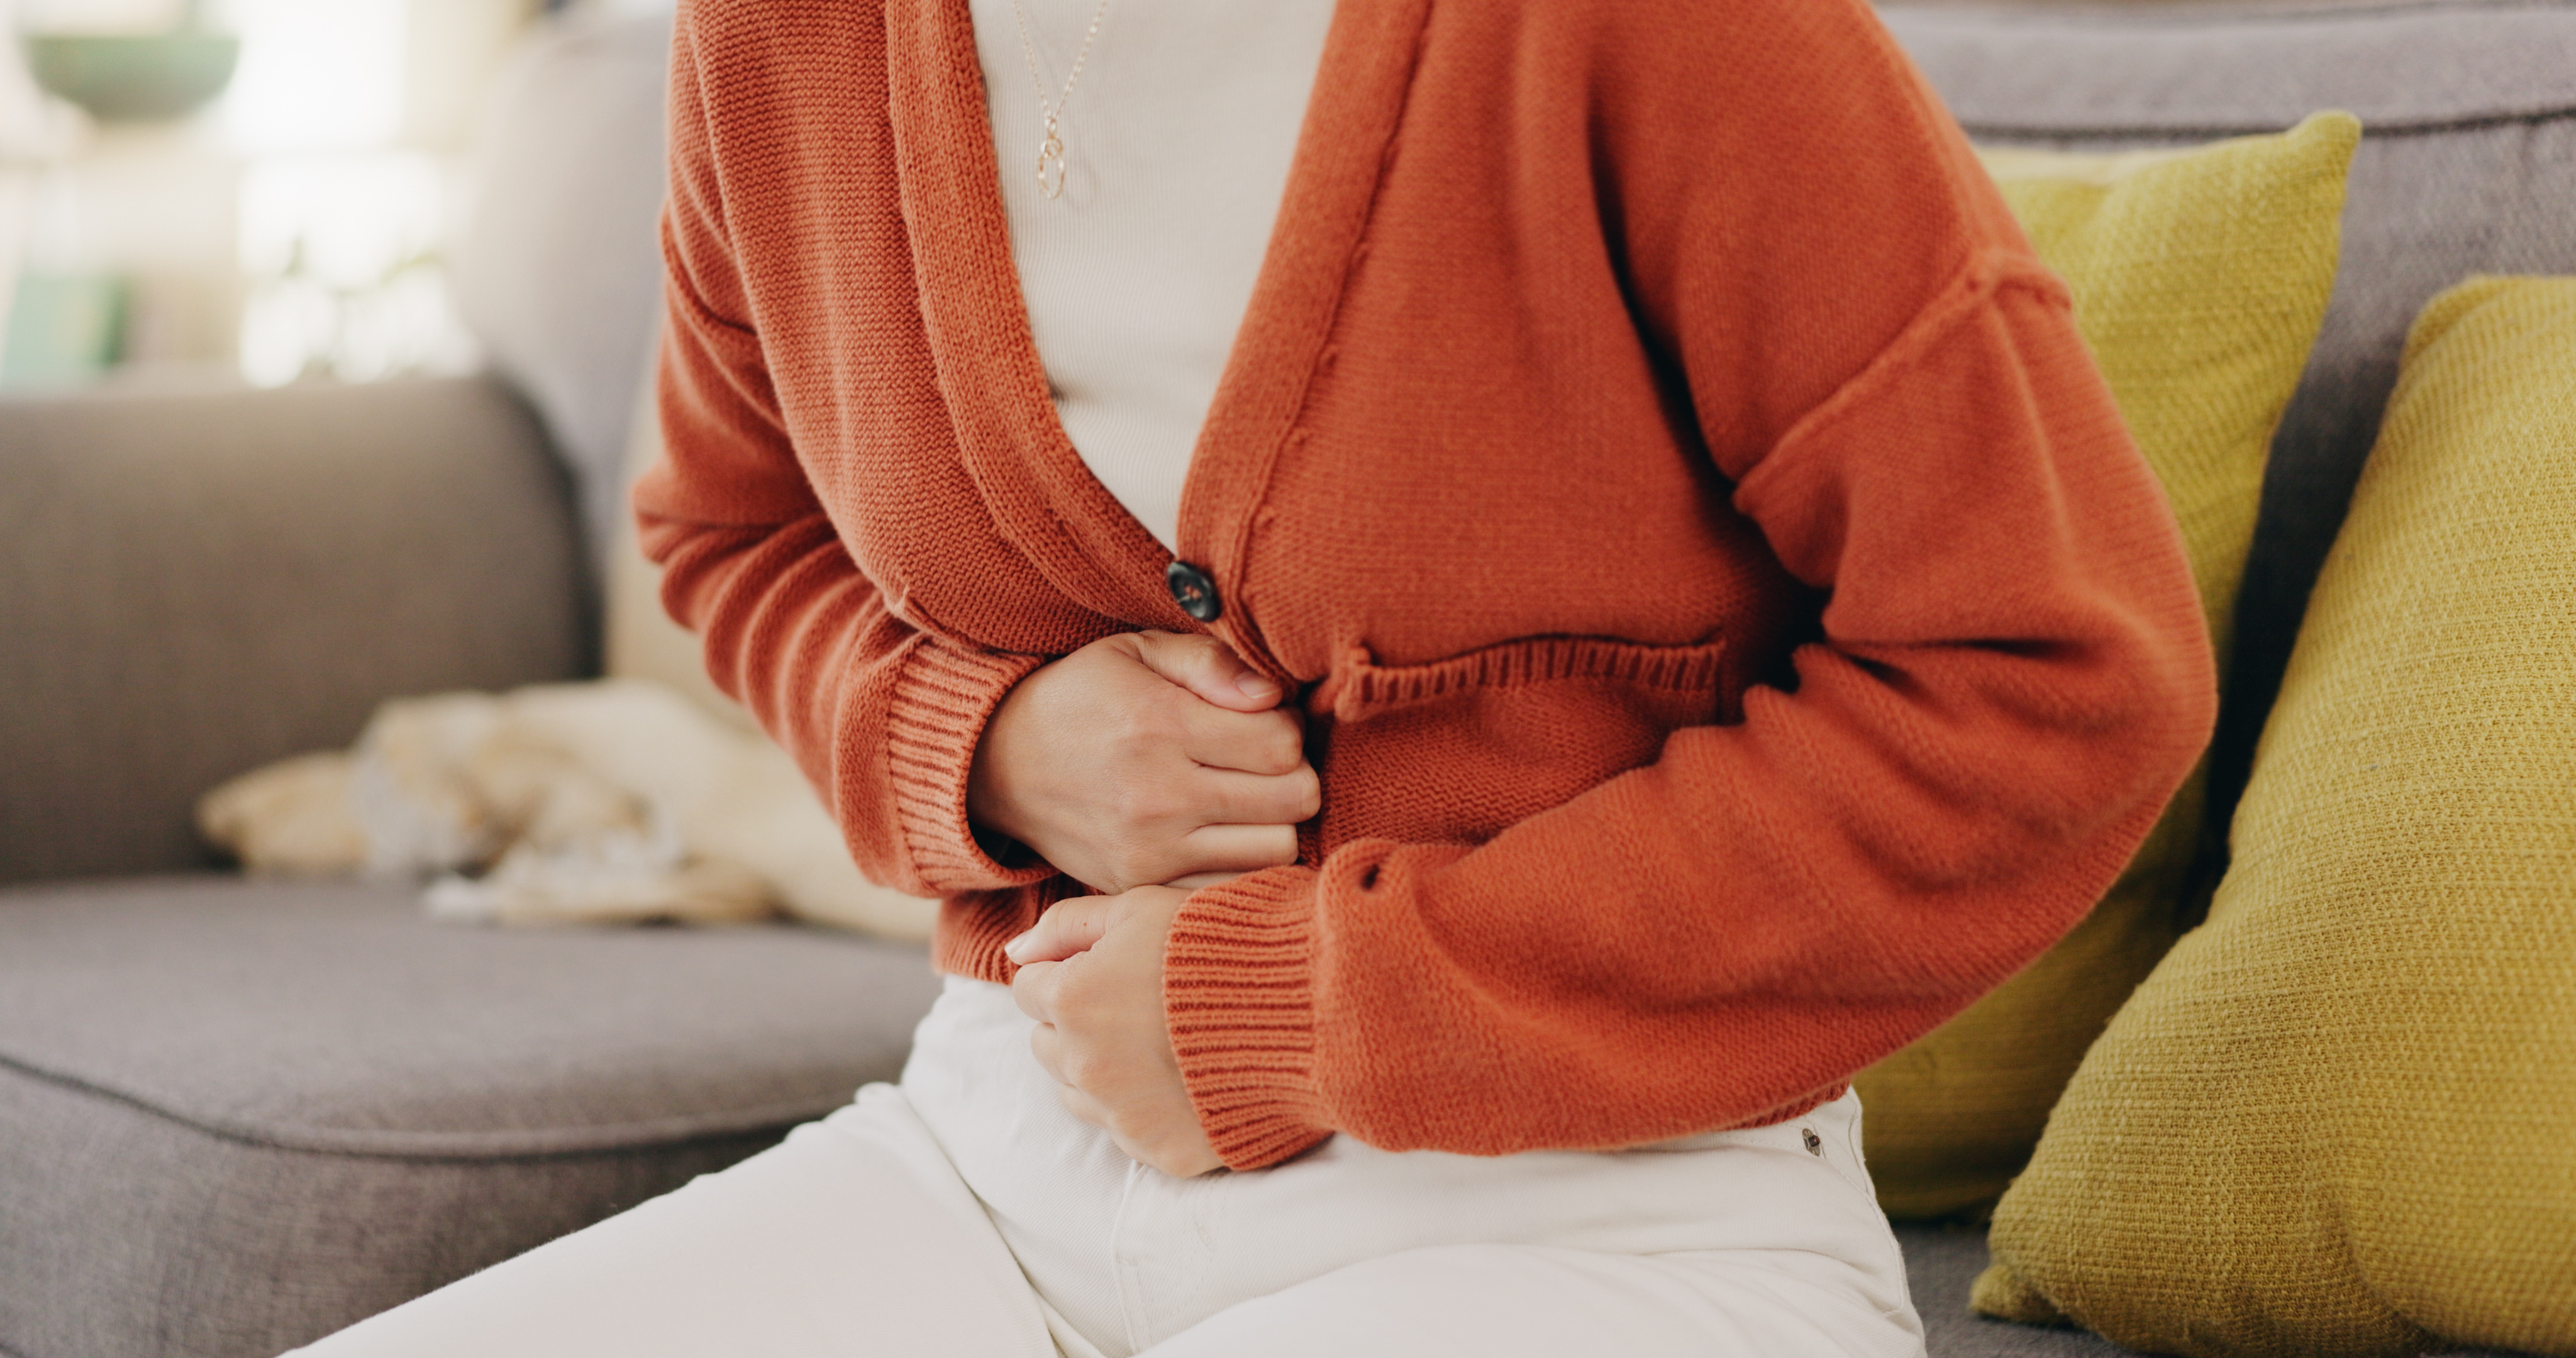 A woman experiencing stomach pain - learn how you can find relief with Vida-Flo's IV hydration treatment for gastrointestinal diseases in Wilmington, NC.